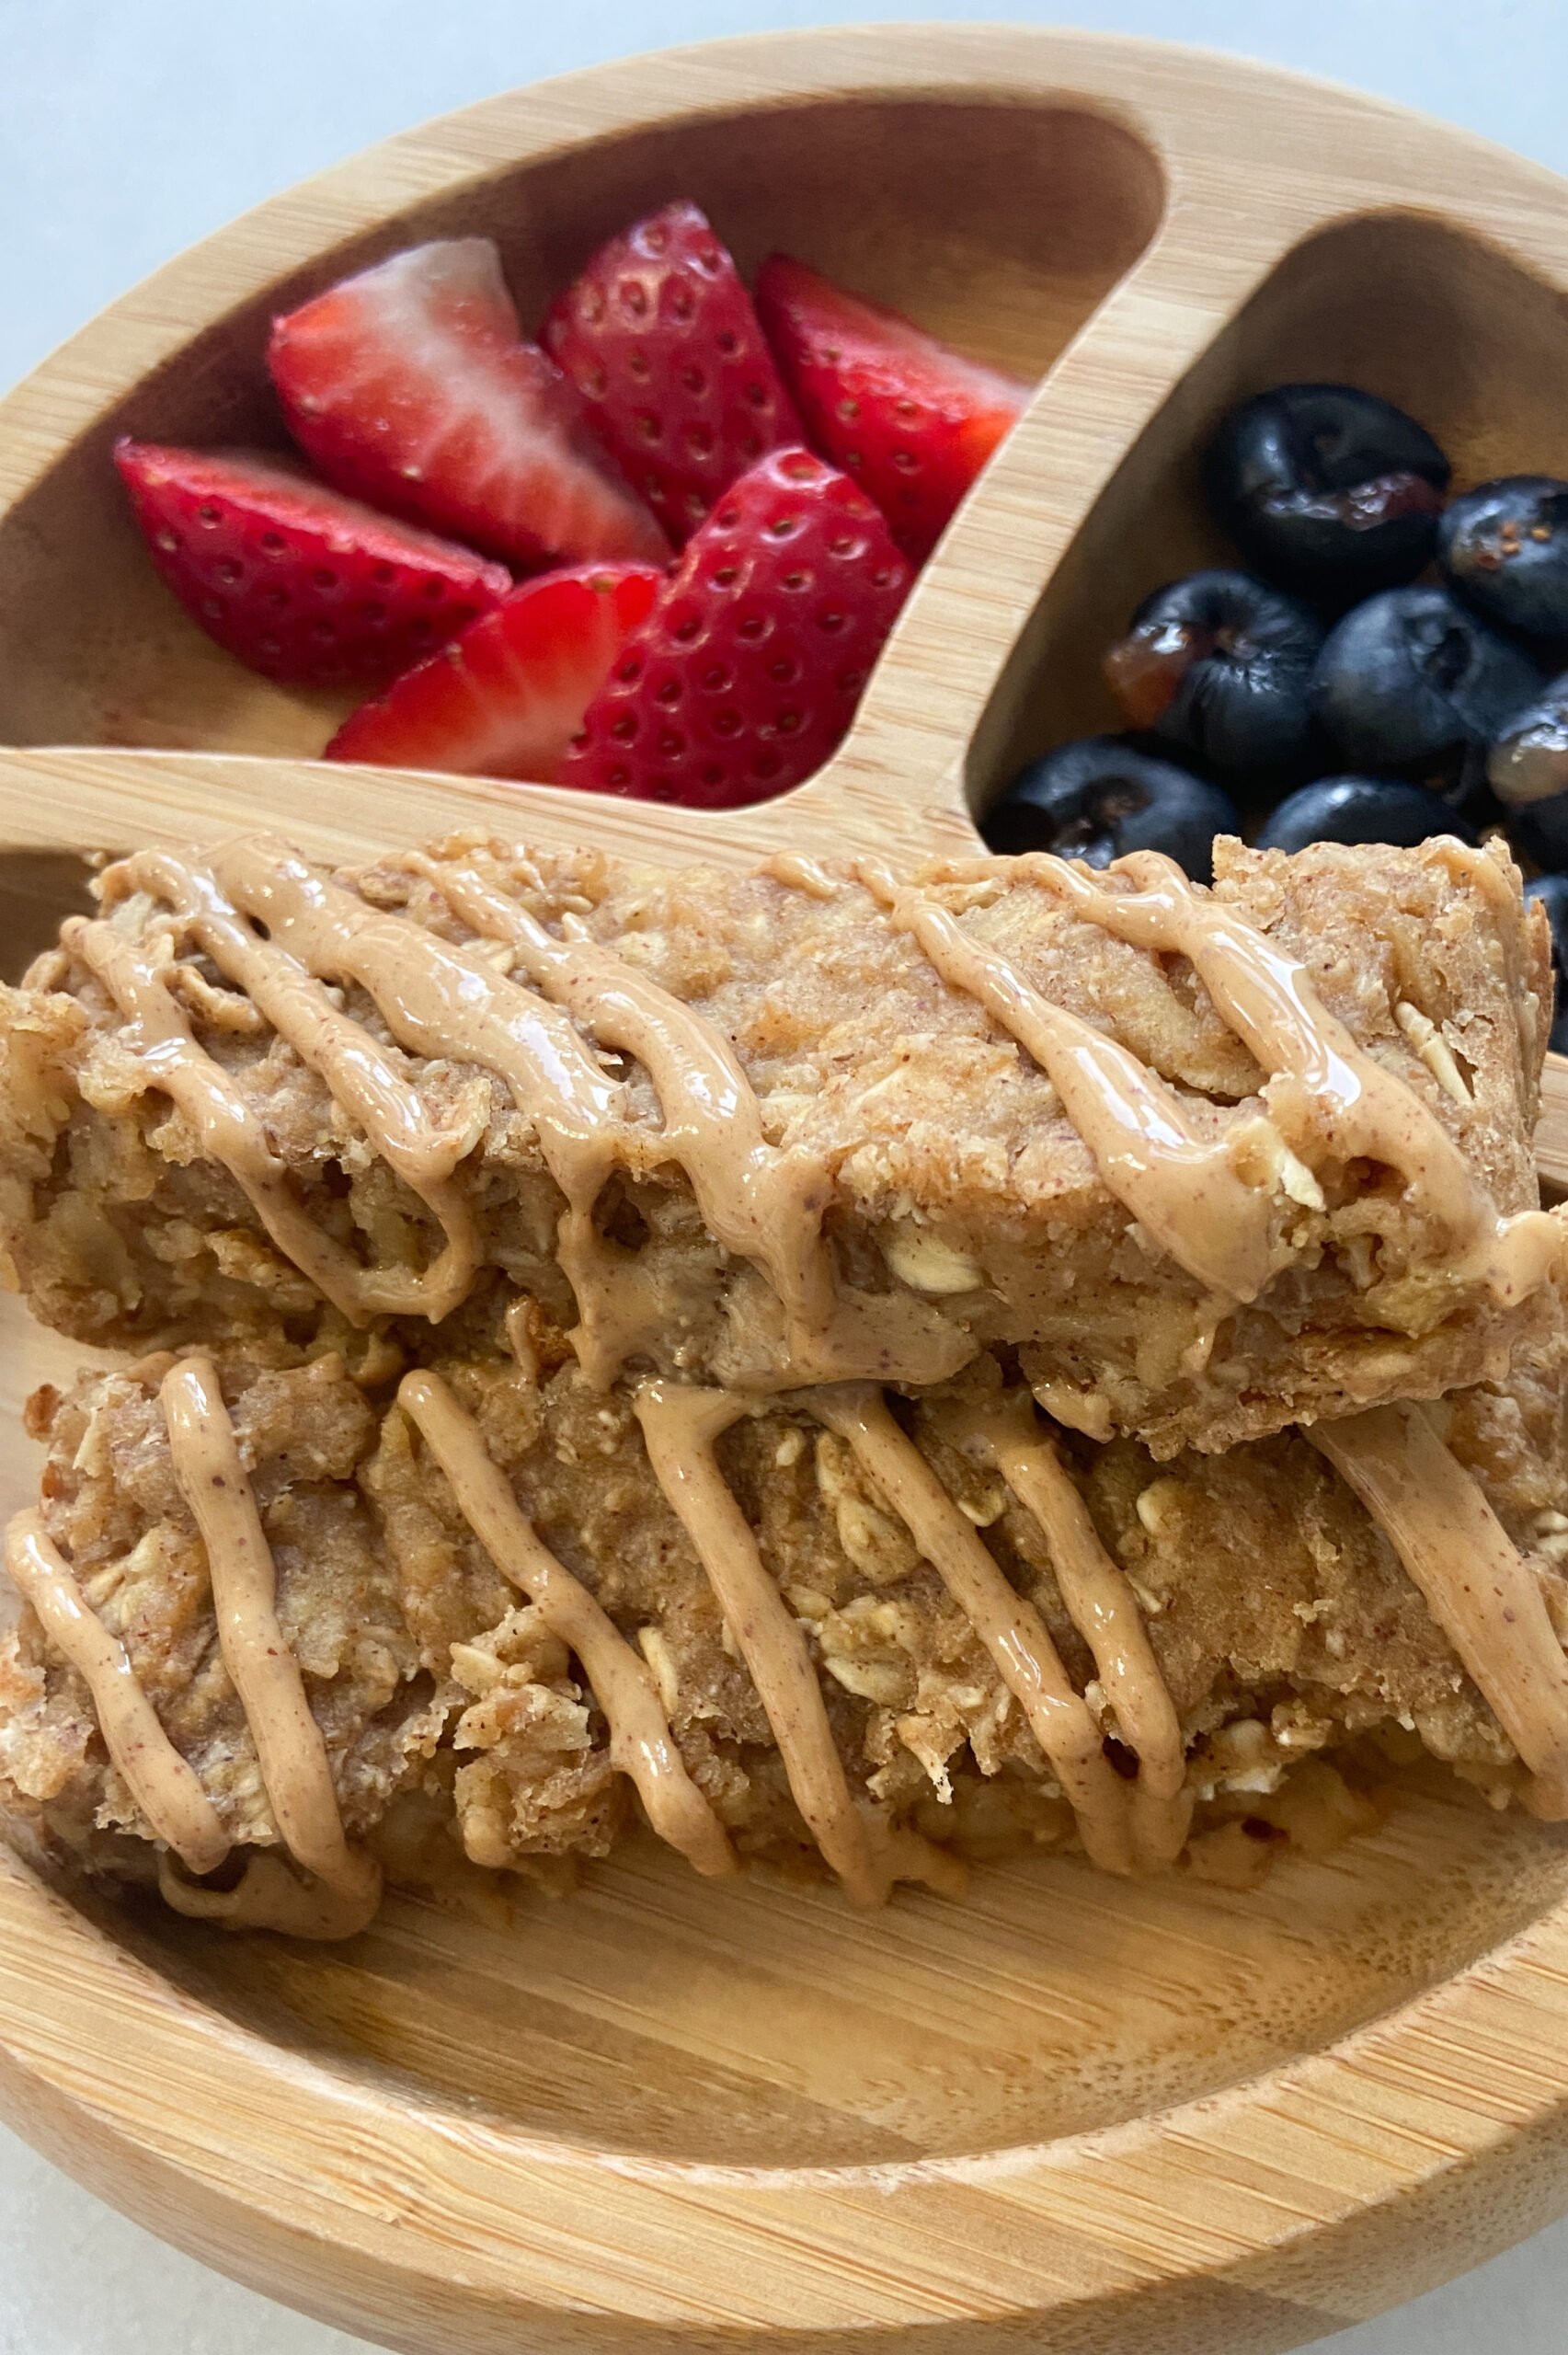 Healthy apple oatmeal bars served with berries